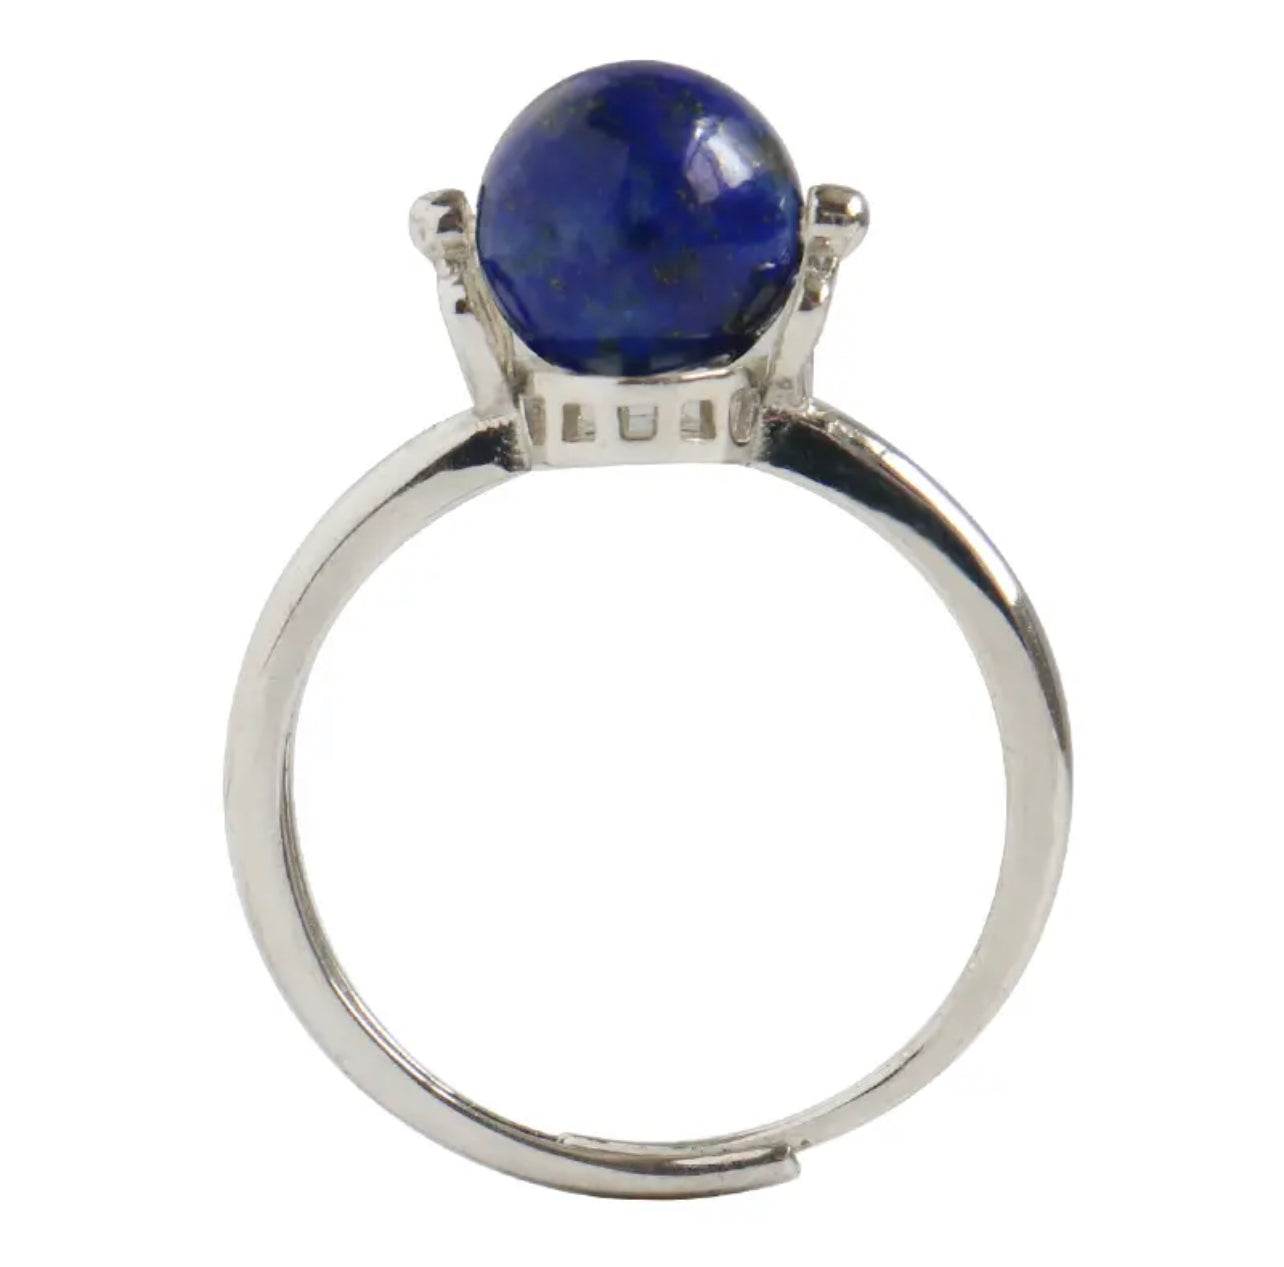 Lapis Lazuli Anxiety Fidget Spinner Ring in 925 Sterling Silver